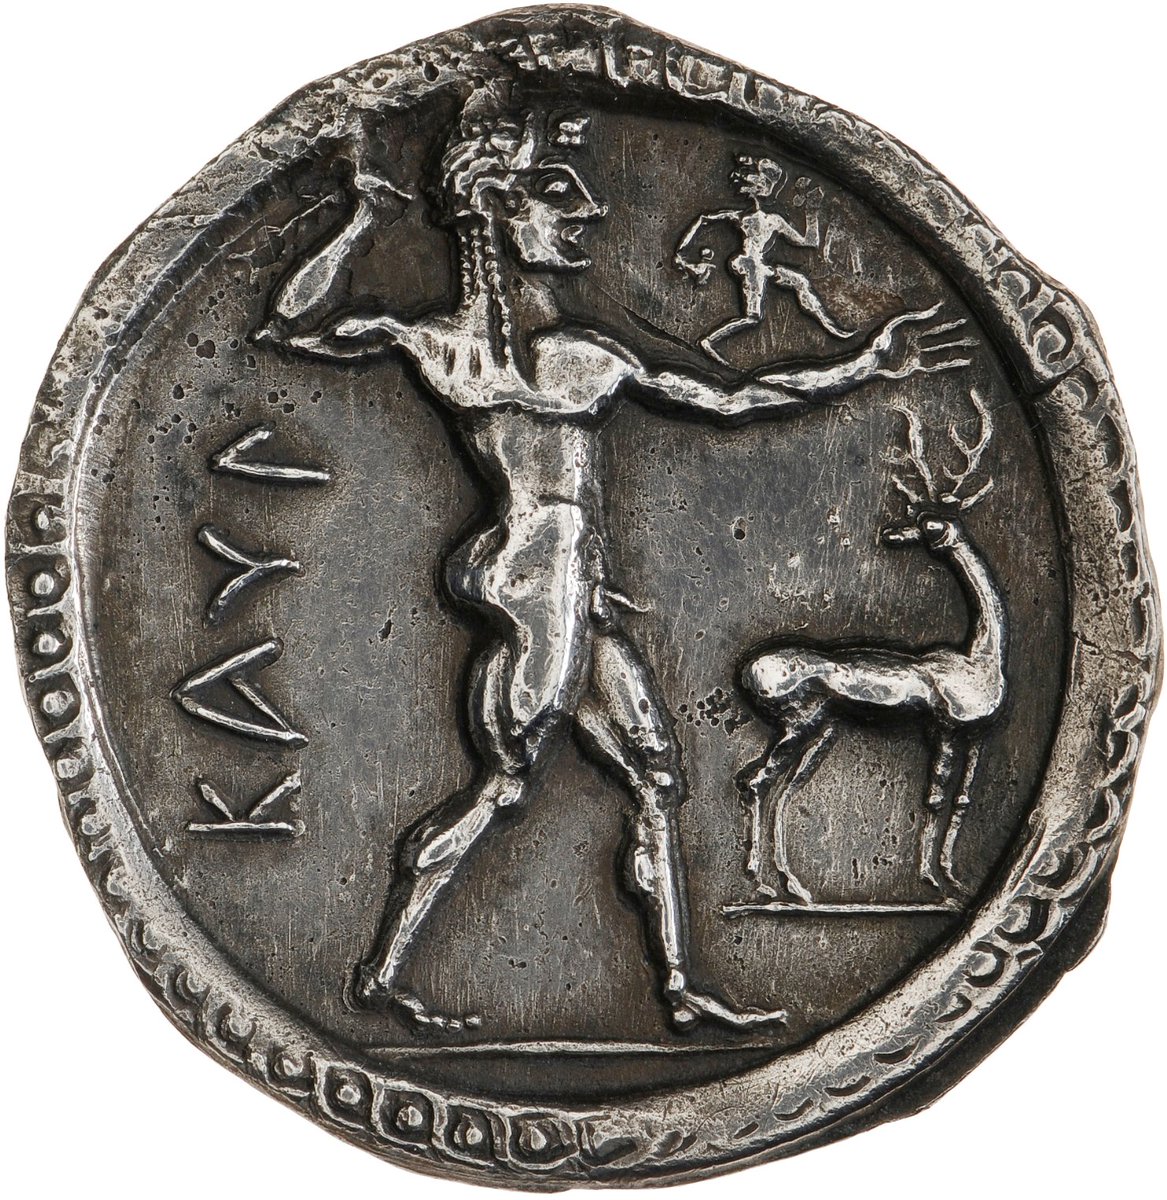 The Obverse of this stater shows a nude Apollo, carrying a branch (perhaps of laurel), with a small running figure on his outstretched left arm. The pose of the figure, with one leg advanced, evokes the Kouros type statues of the period, although the pose is more animated.